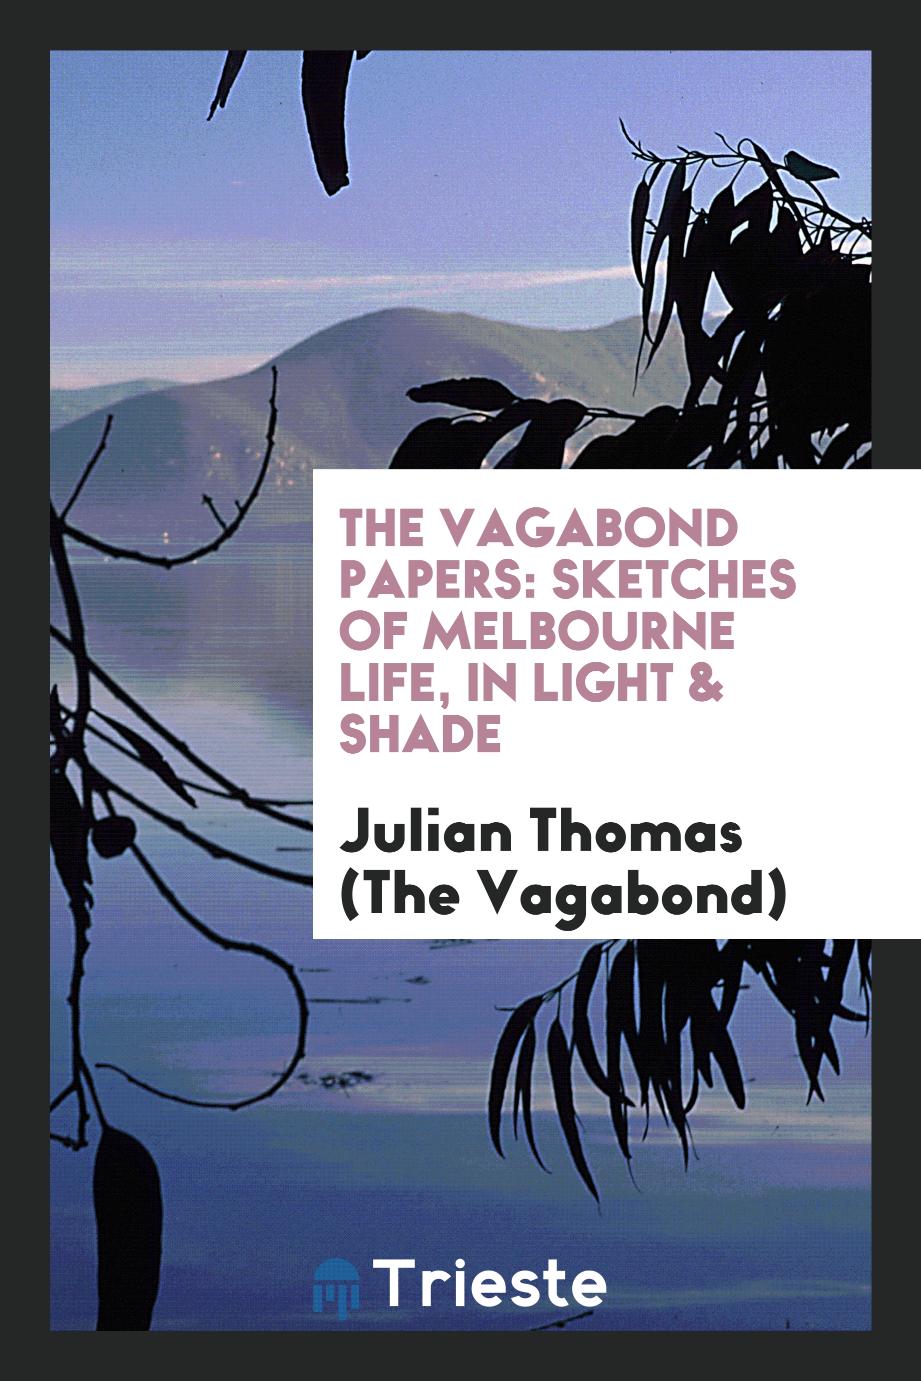 The Vagabond Papers: Sketches of Melbourne Life, in Light & Shade